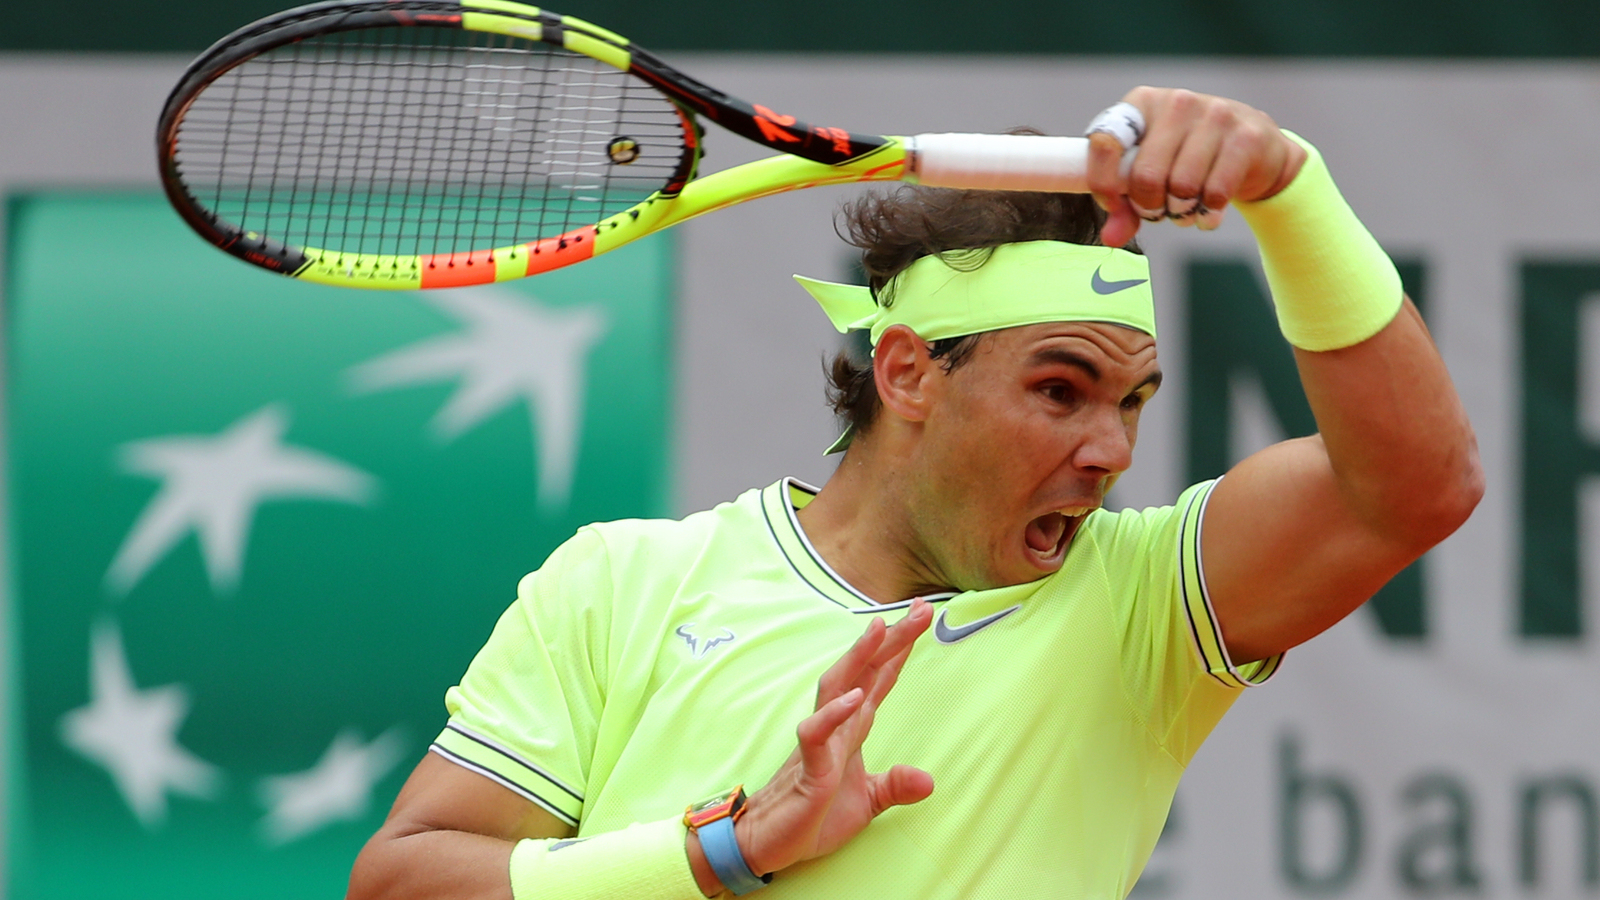 Tennis fans should ‘enjoy watching’ Rafael Nadal while they still can, says golf pro